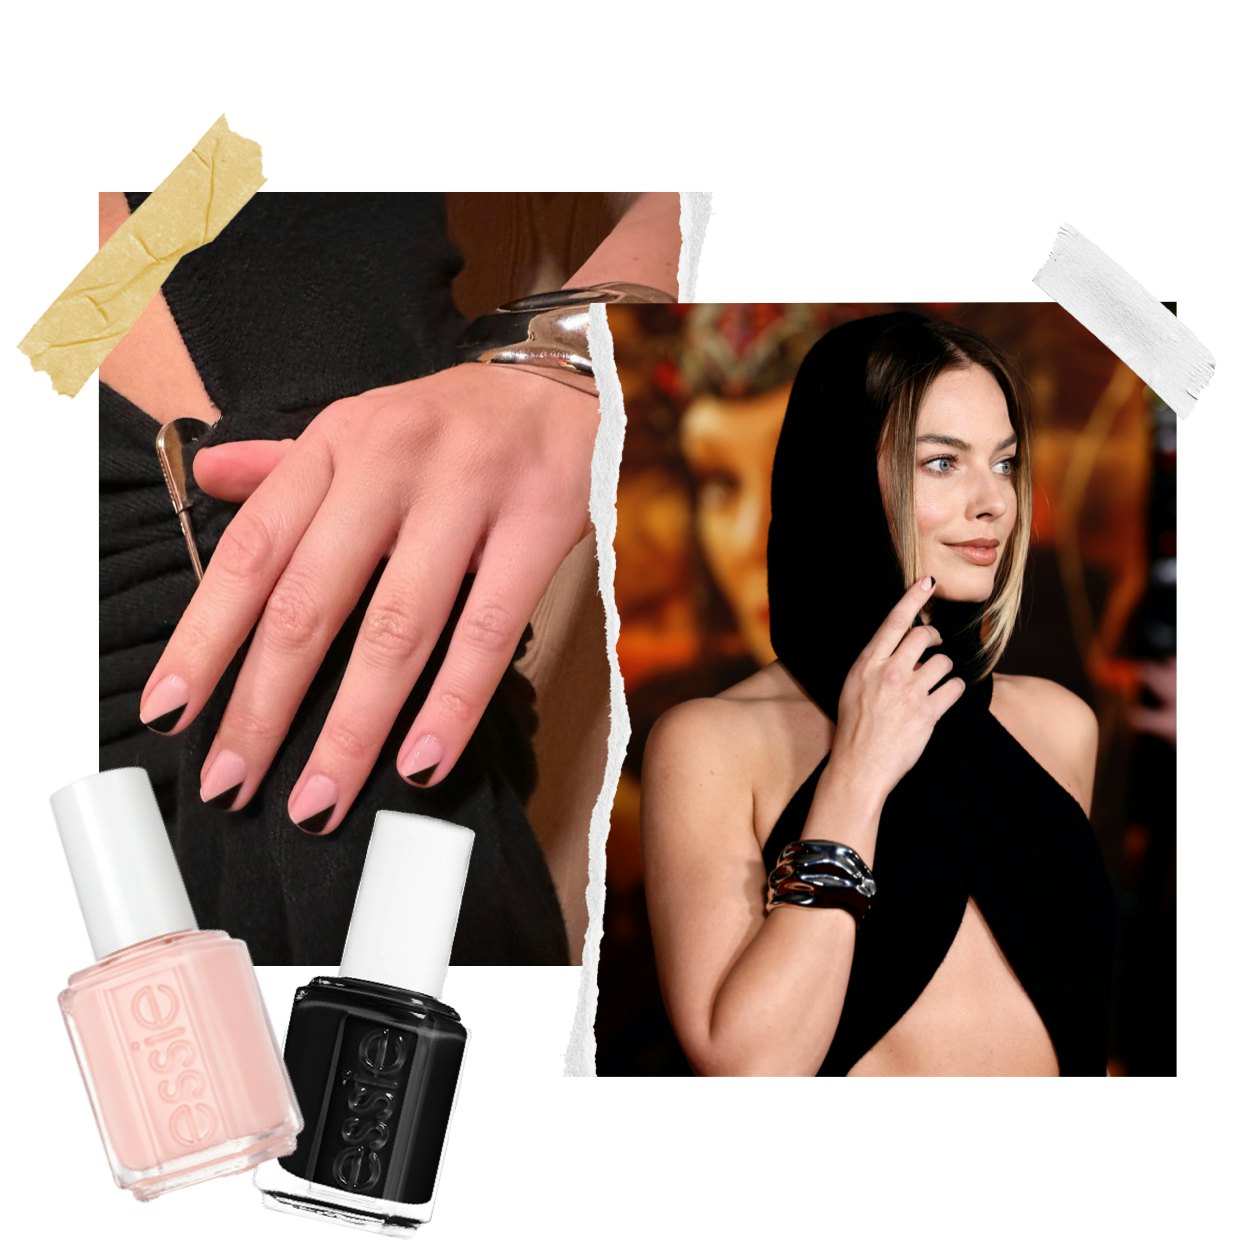 Top 5 Nail Trends For 2014 | Nailpro